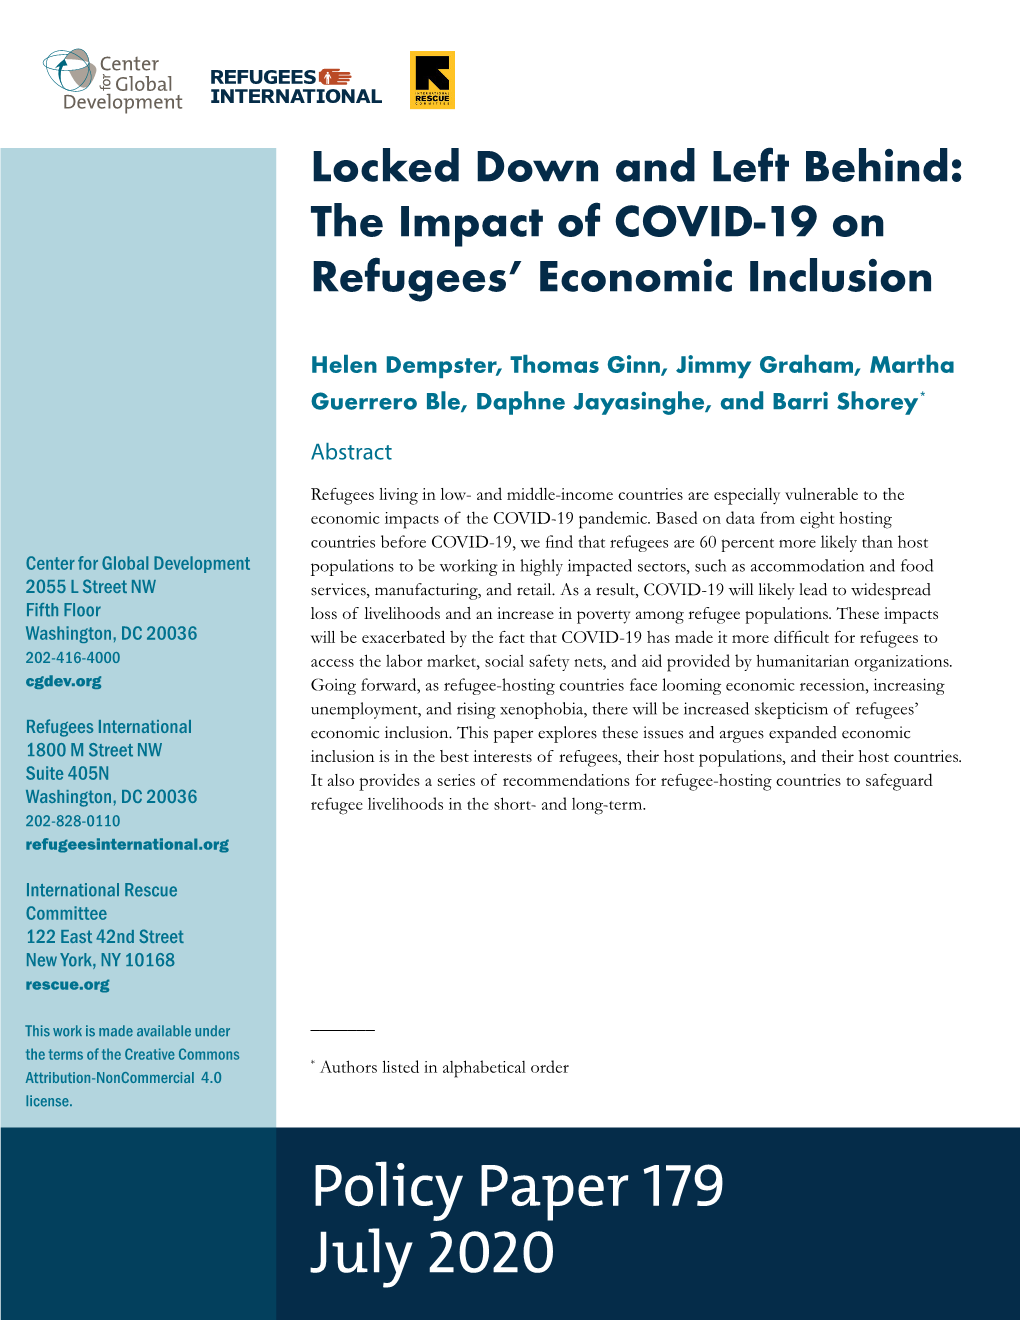 The Impact of Covid-19 on Refugees' Economic Inclusion